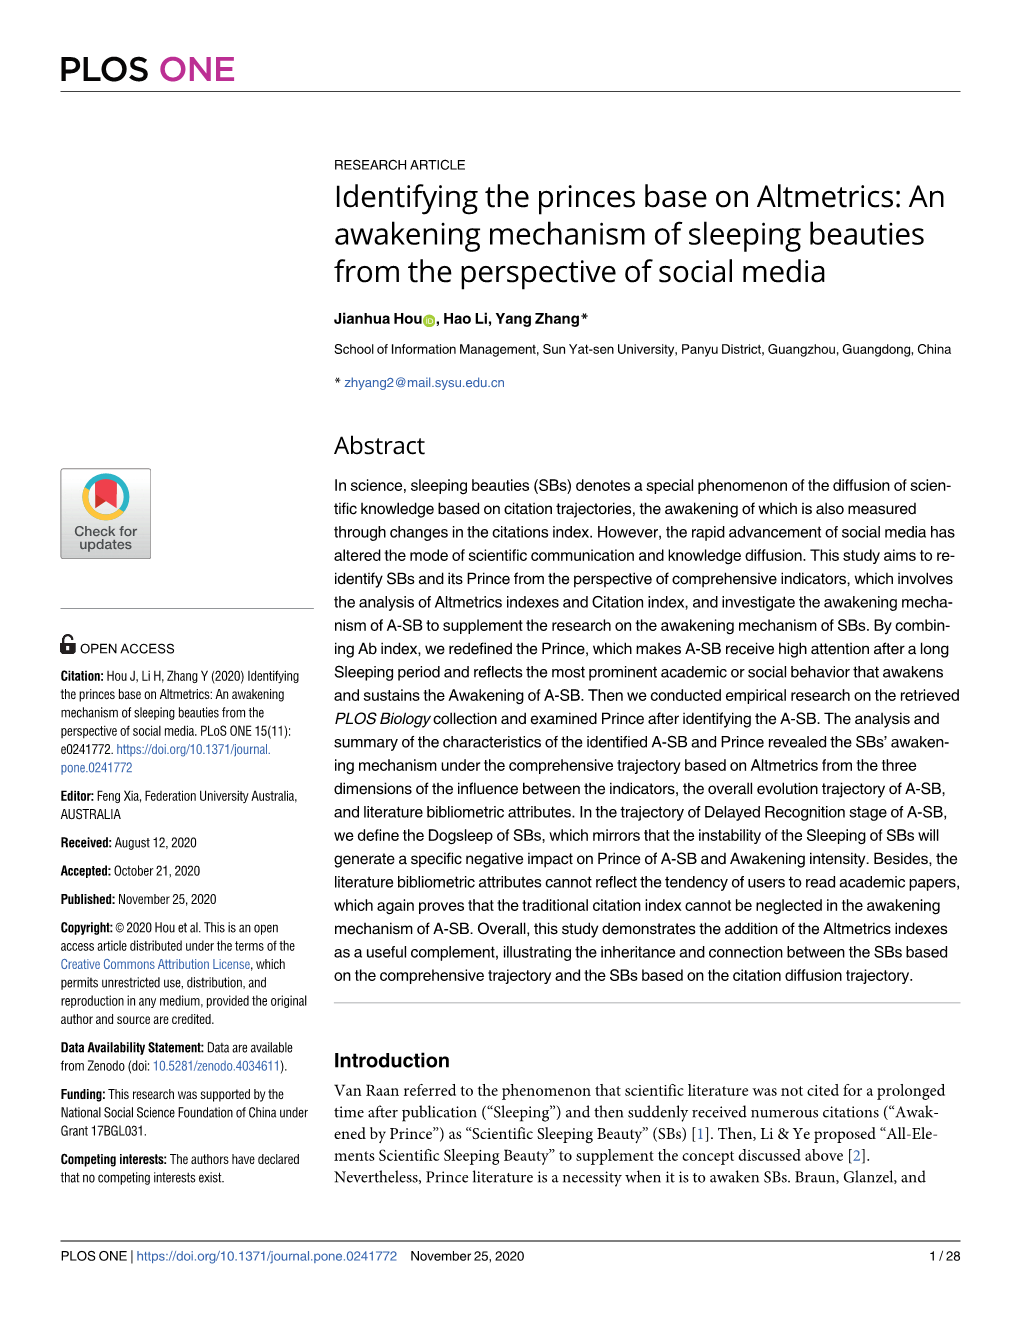 Identifying the Princes Base on Altmetrics: an Awakening Mechanism of Sleeping Beauties from the Perspective of Social Media